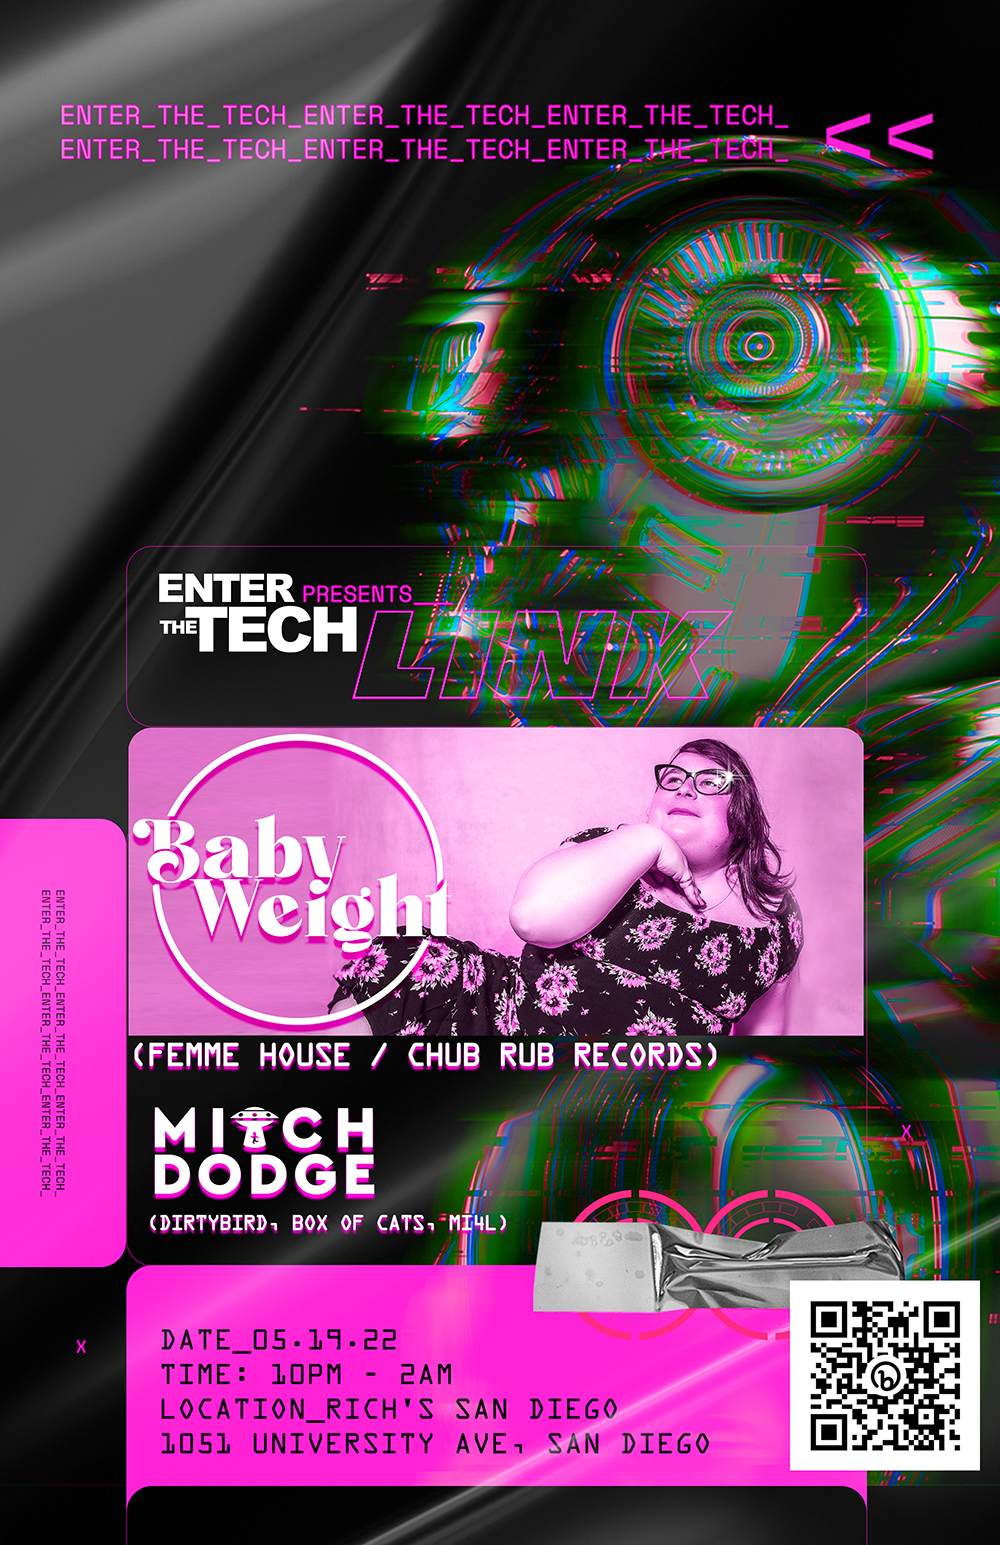 Enter The Tech presents Link feat. Baby Weight, Mitch Dodge - Página frontal